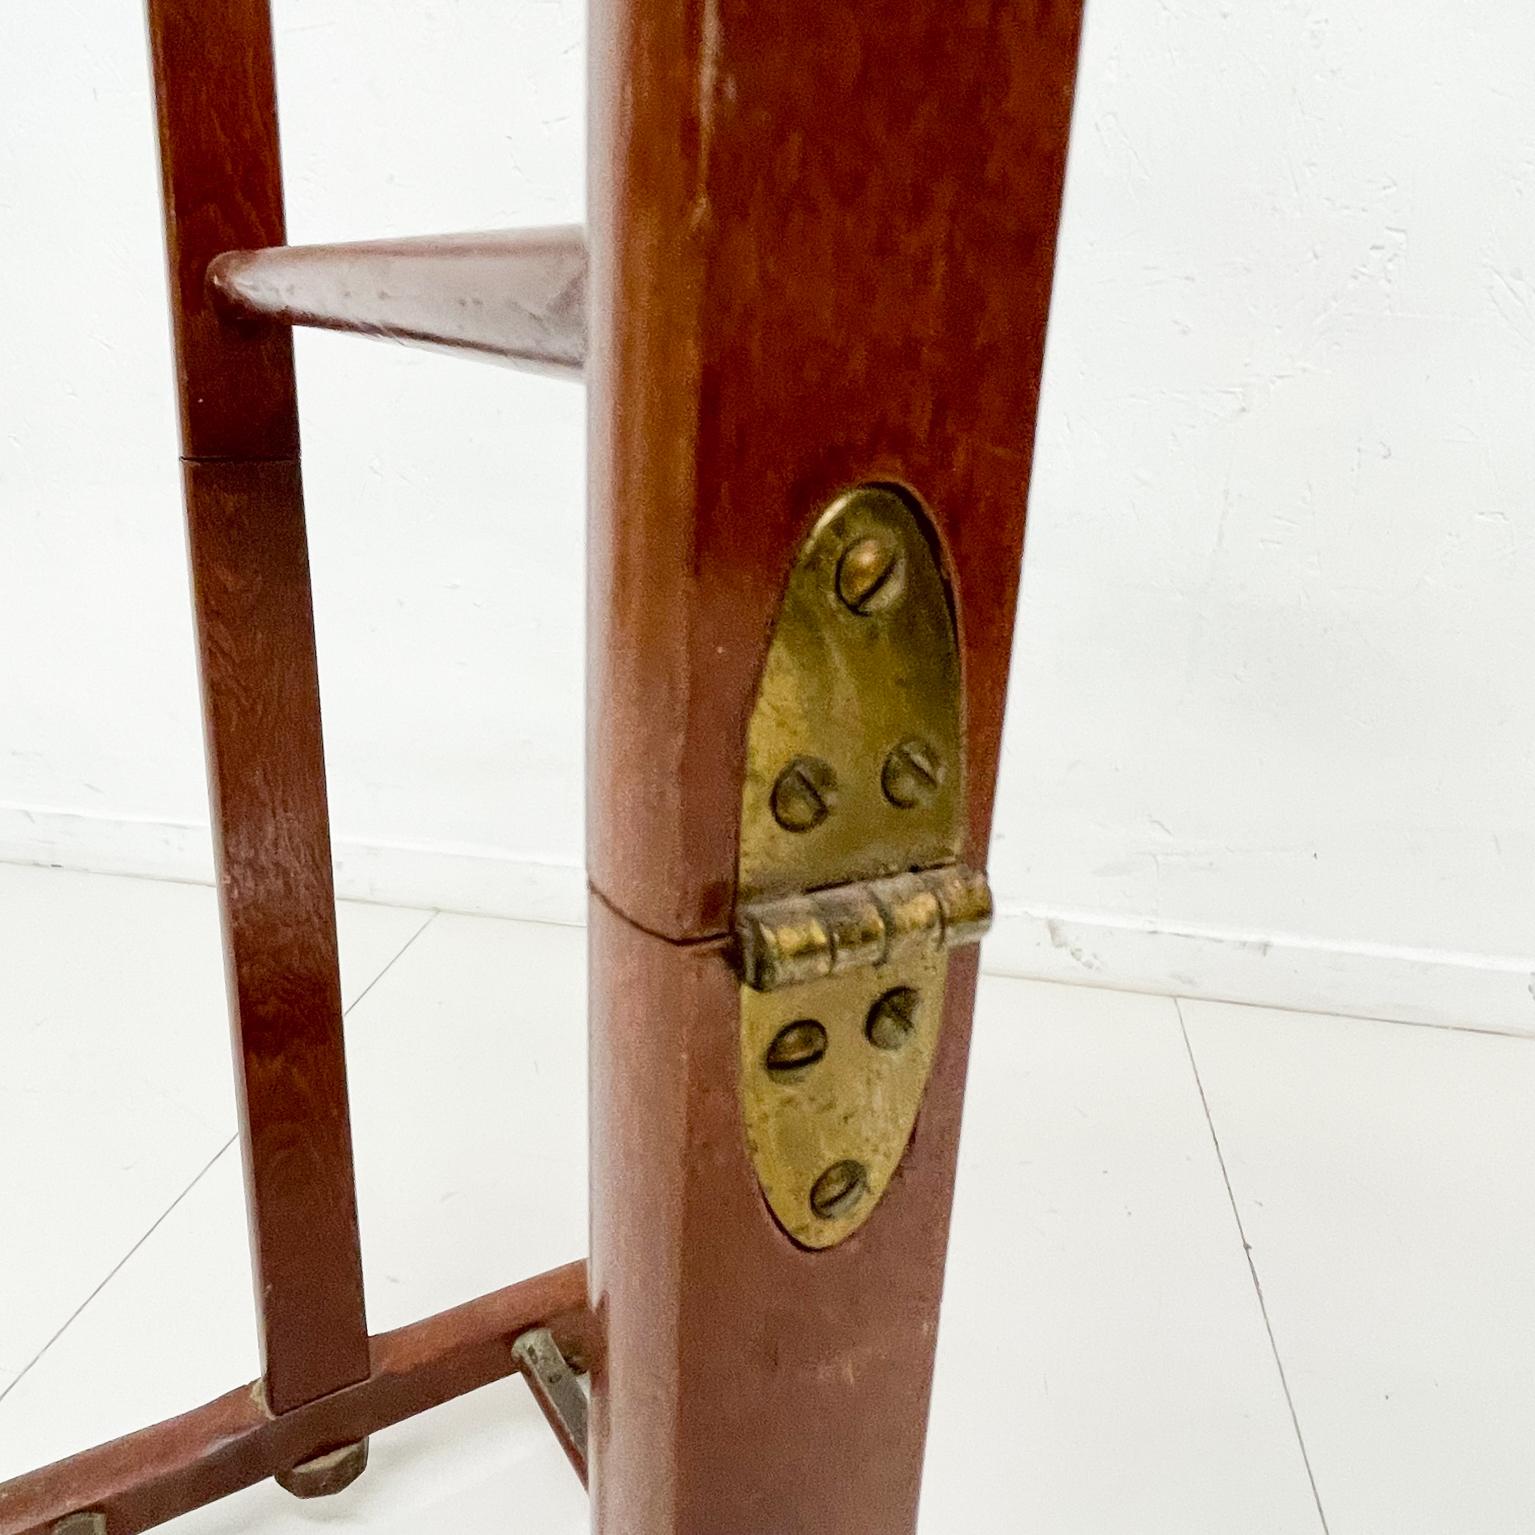 Mid-20th Century Gentleman's Collapsible Wood Travel Valet Stand on Wheels 1950s Made in Italy